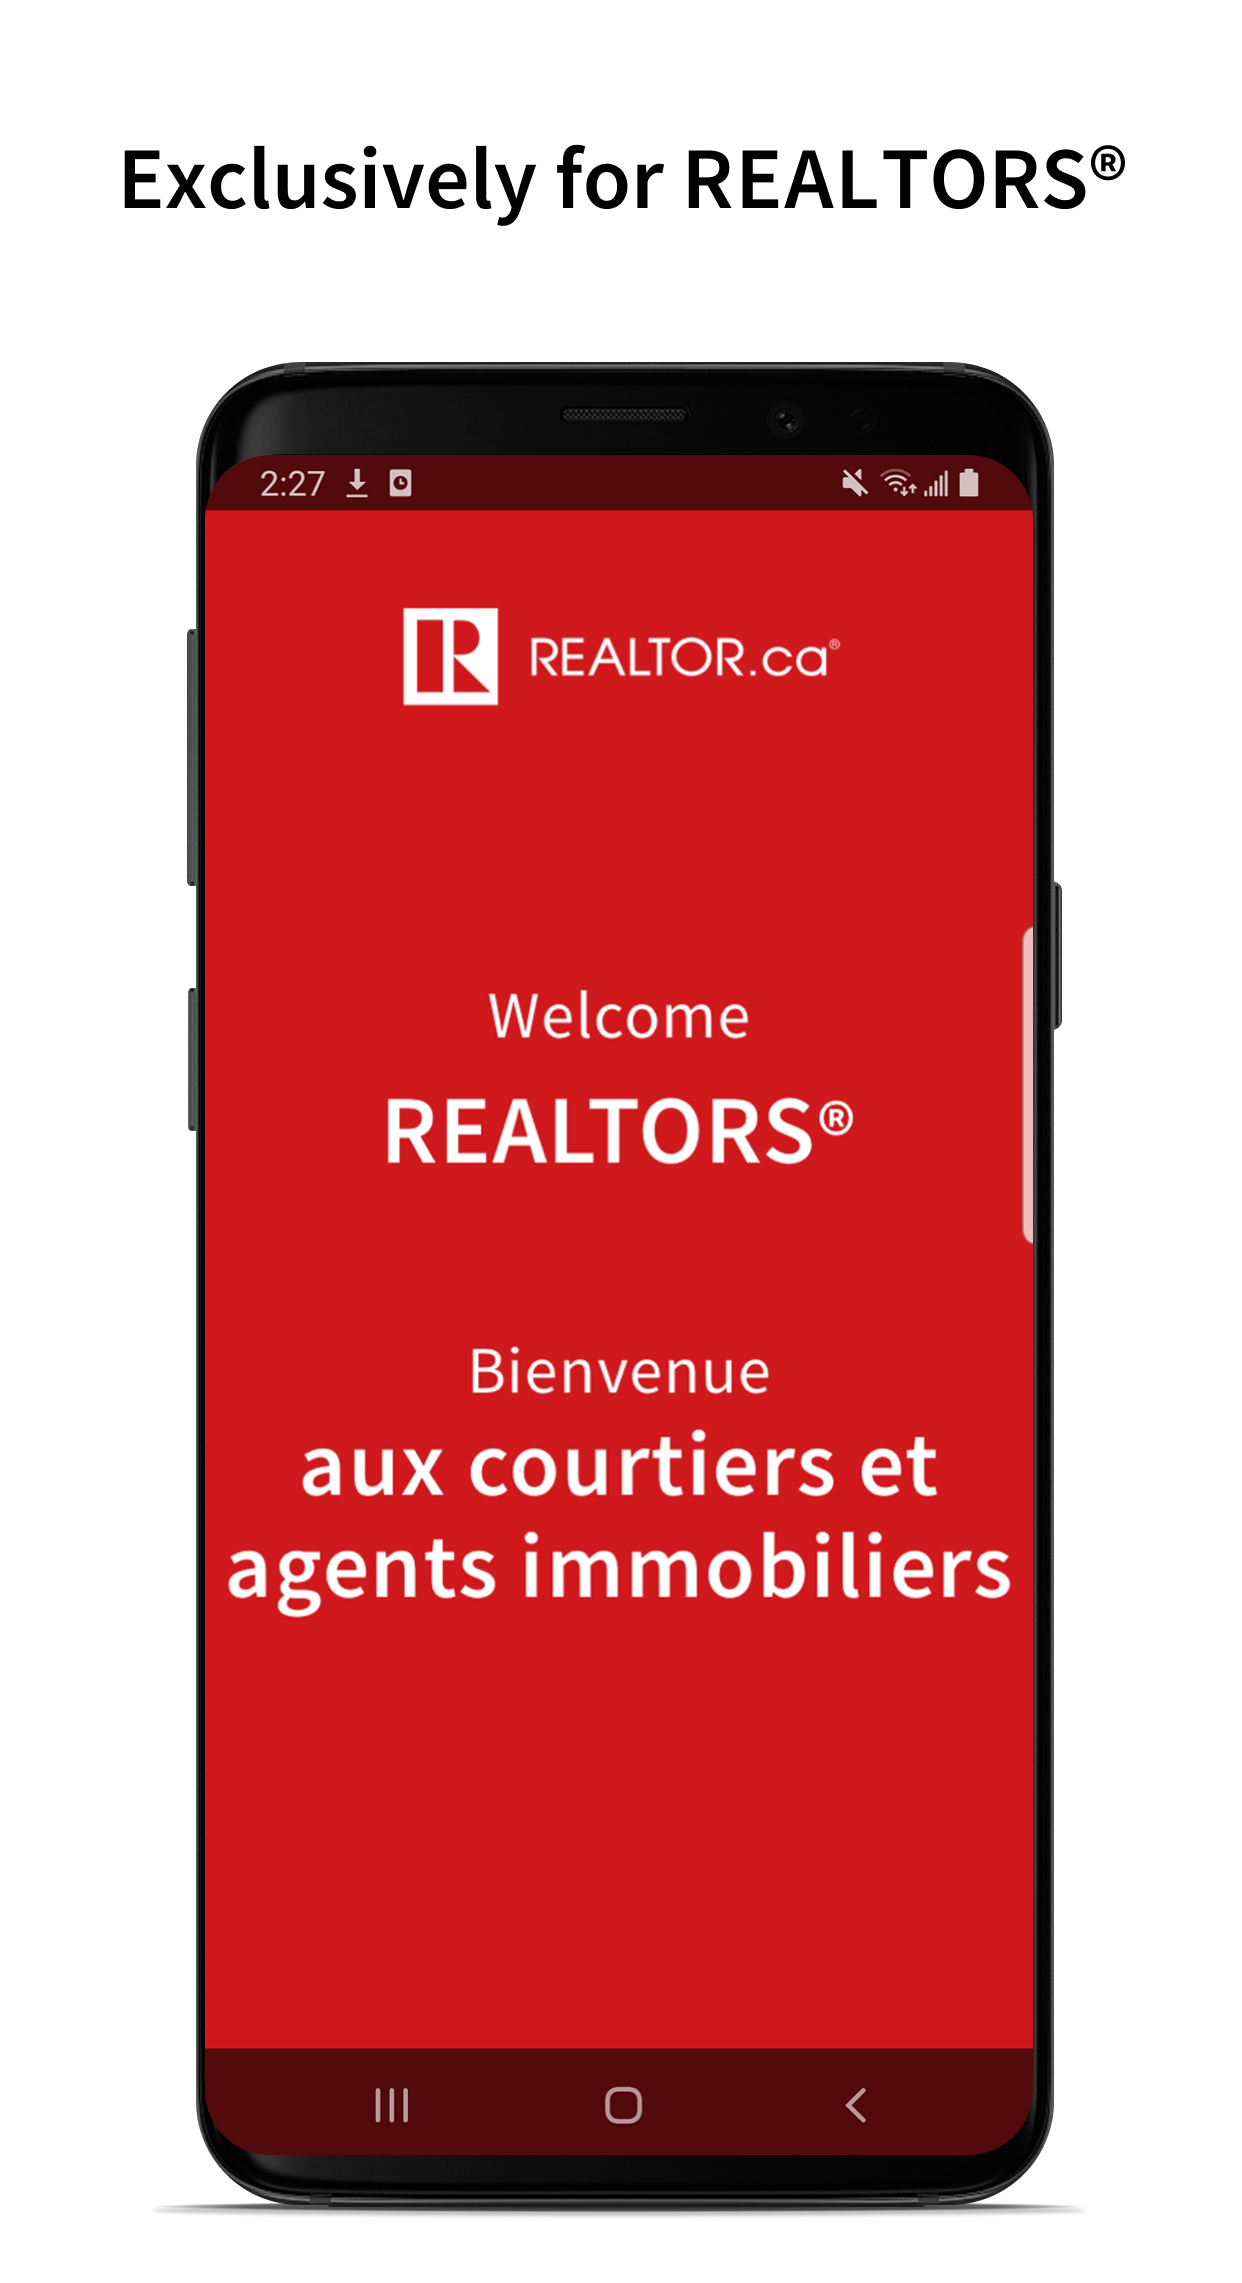 The truth about realtor.ca for Ontario Home Buyers and Sellers